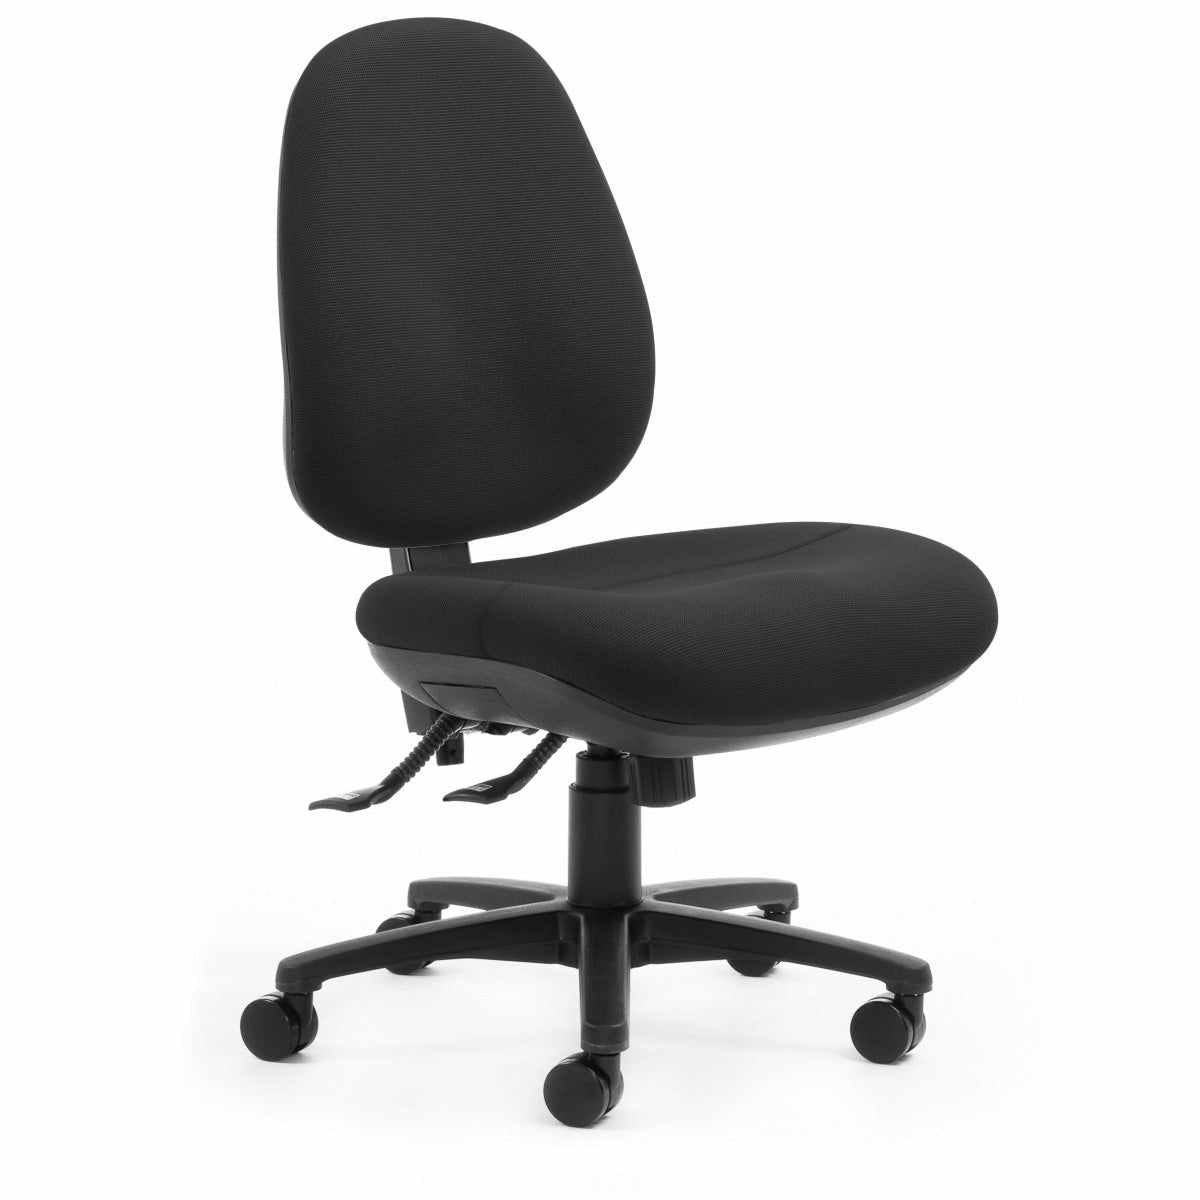 SitFit High Back Dual Zone Chair